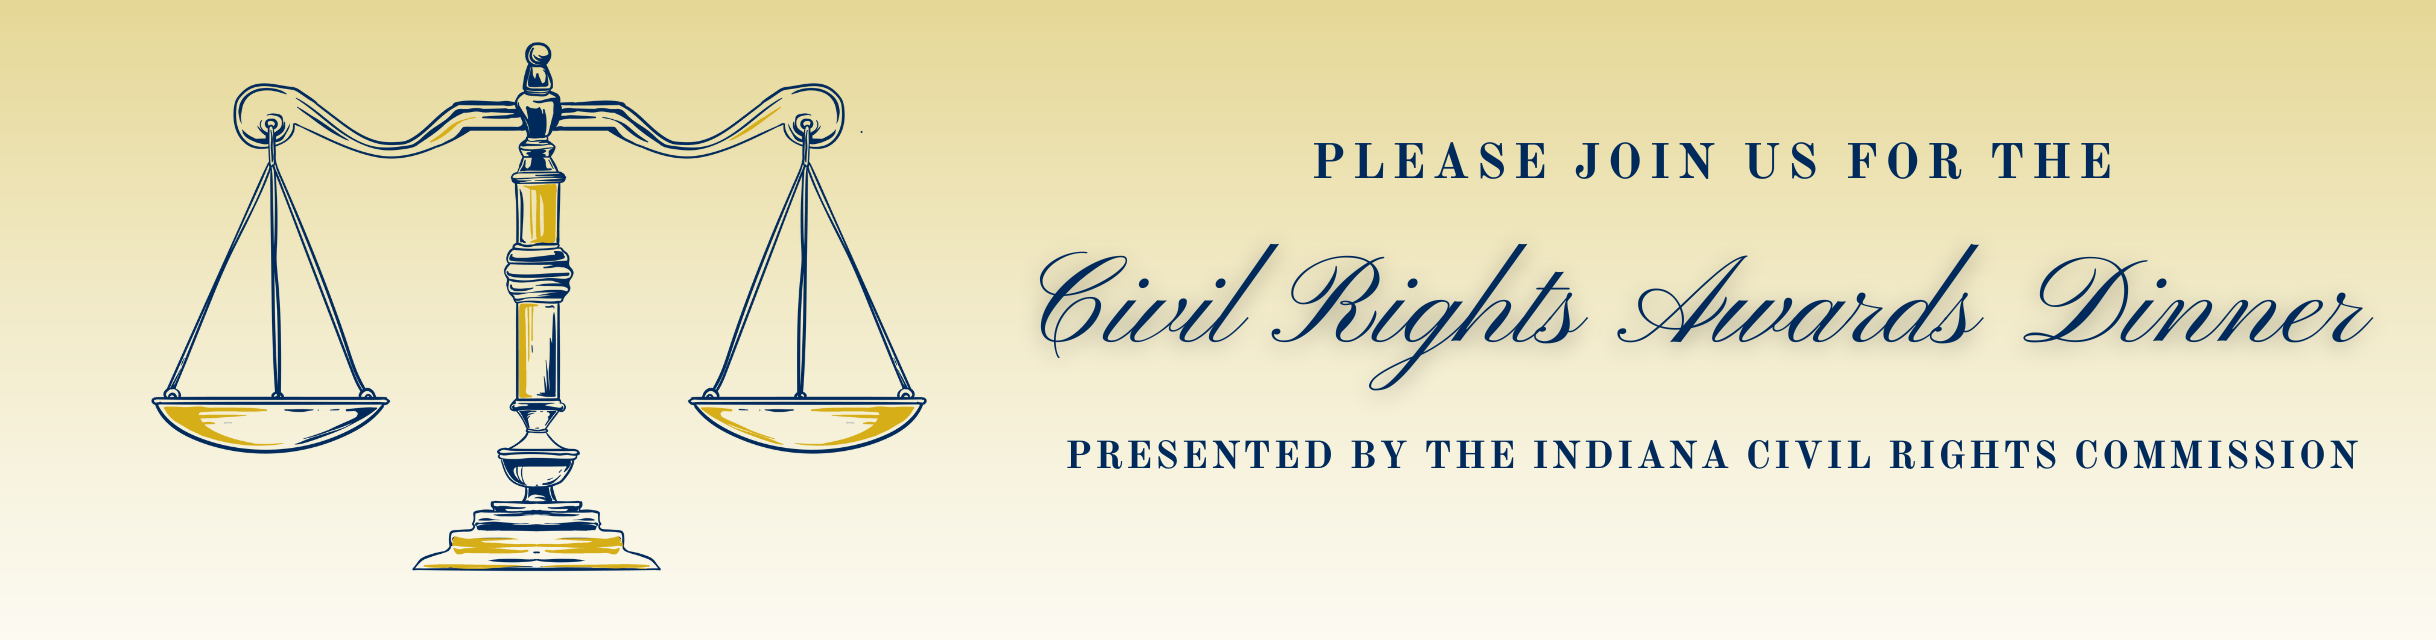 Please join us for the Civil Rights Awards Dinner!